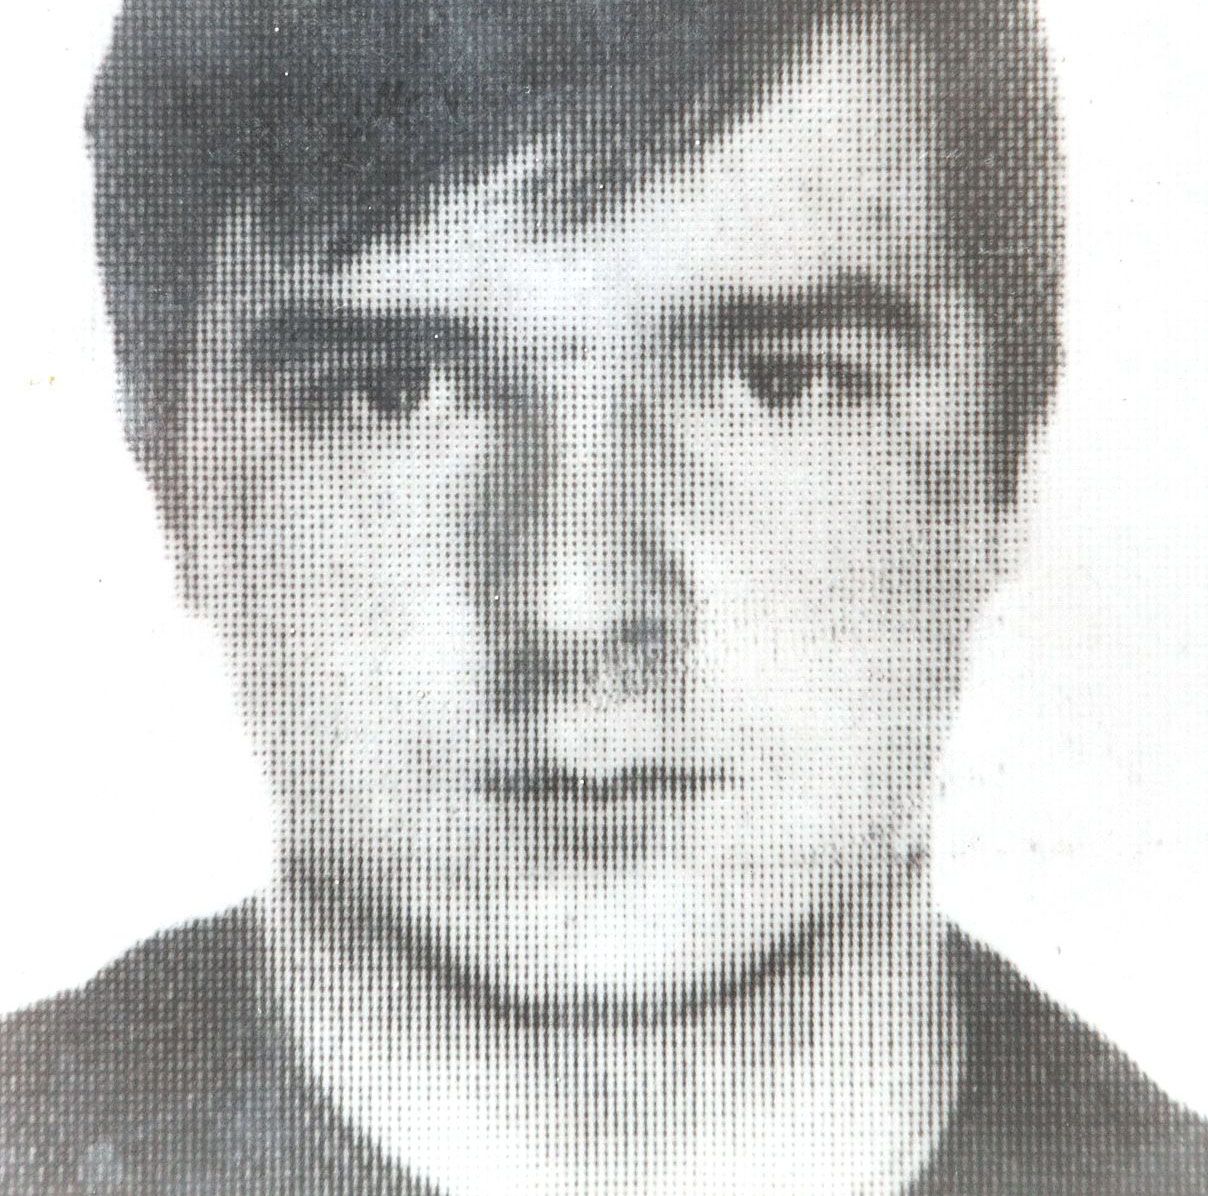 COURTS: The Belfast High Court has ruled the PPS did not take the decision to charge two RUC officers with the killing of Pearse Jordan in November 1992.